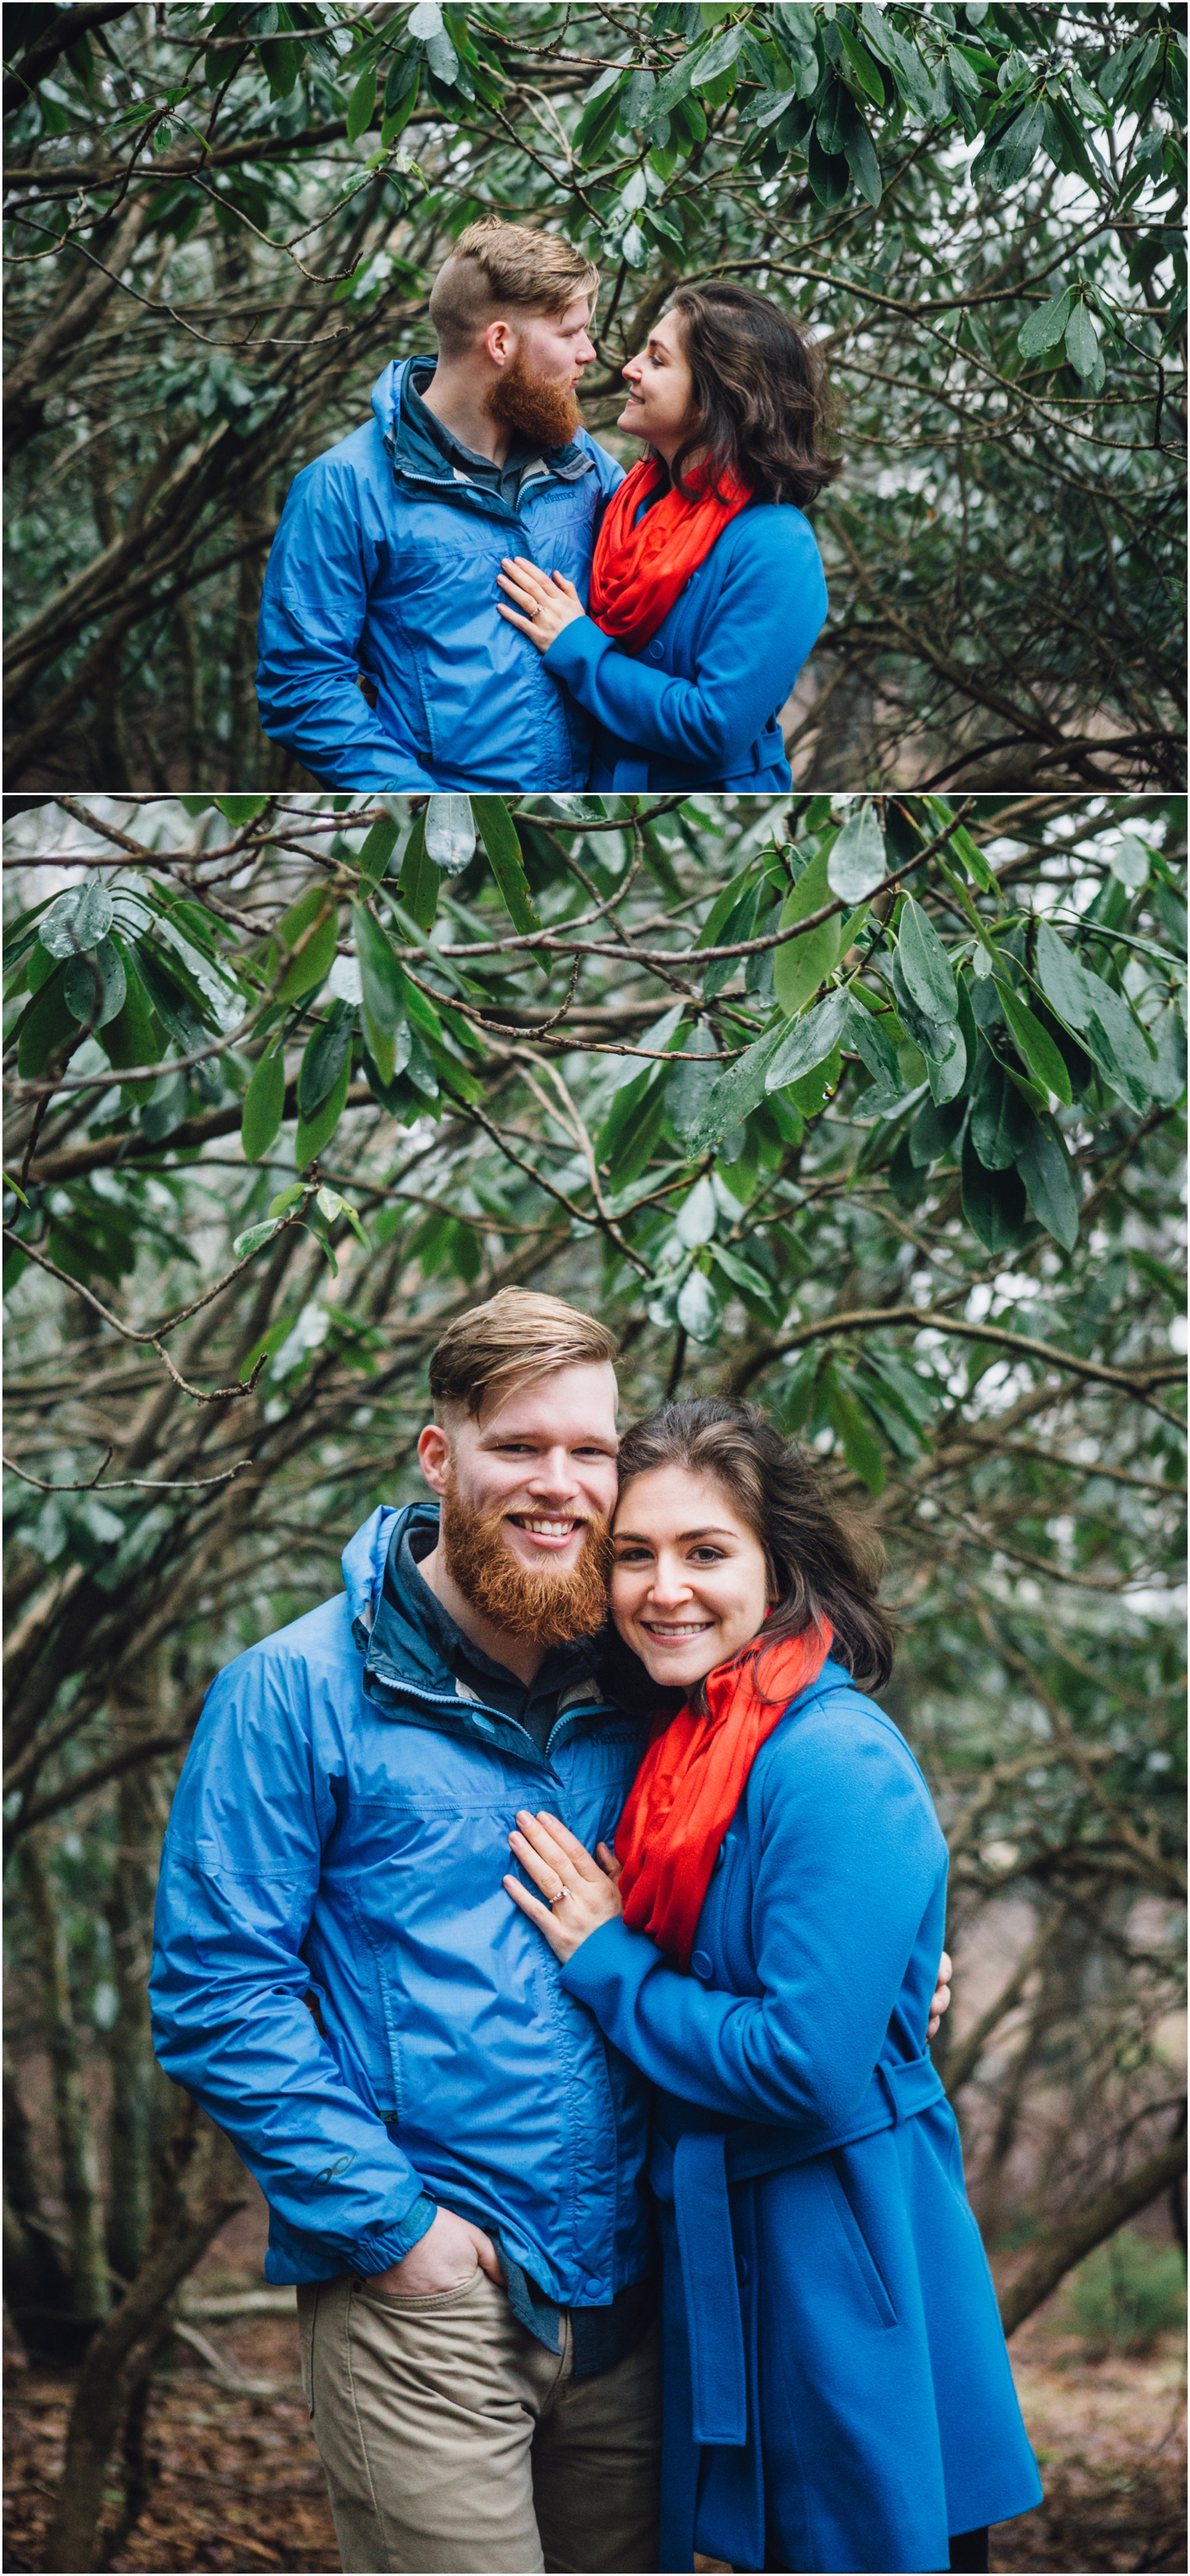 katy-sergent-photography-grayson-highlands-engagement-session-mouth-of-wilson-virginia-damascus-appalachian-trail-tennessee-wedding-elopement_0014.jpg